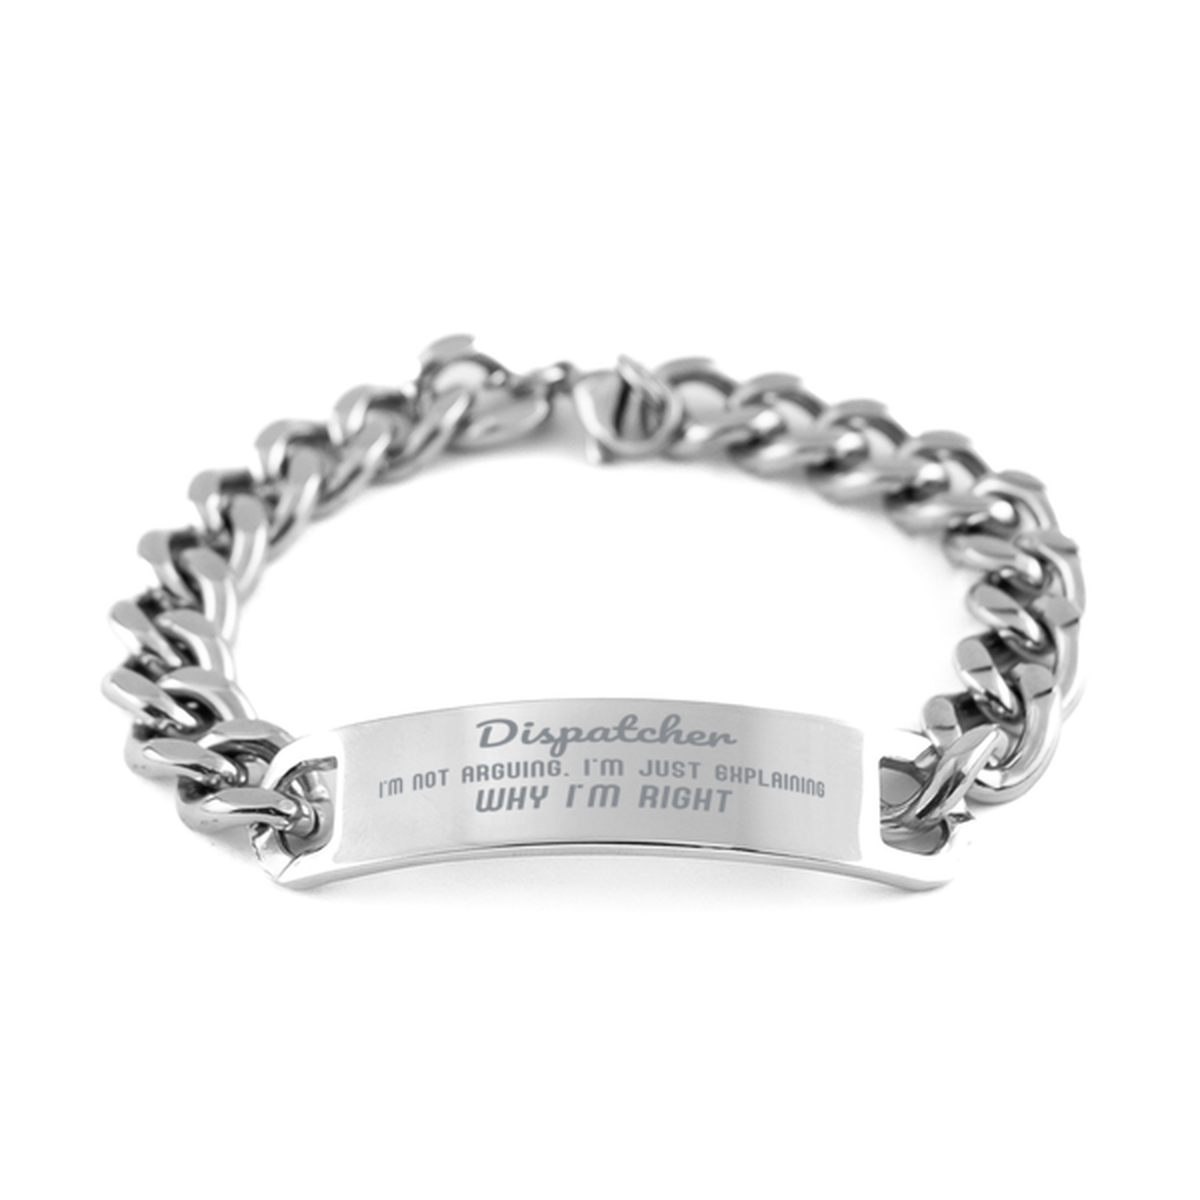 Dispatcher I'm not Arguing. I'm Just Explaining Why I'm RIGHT Cuban Chain Stainless Steel Bracelet, Graduation Birthday Christmas Dispatcher Gifts For Dispatcher Funny Saying Quote Present for Men Women Coworker